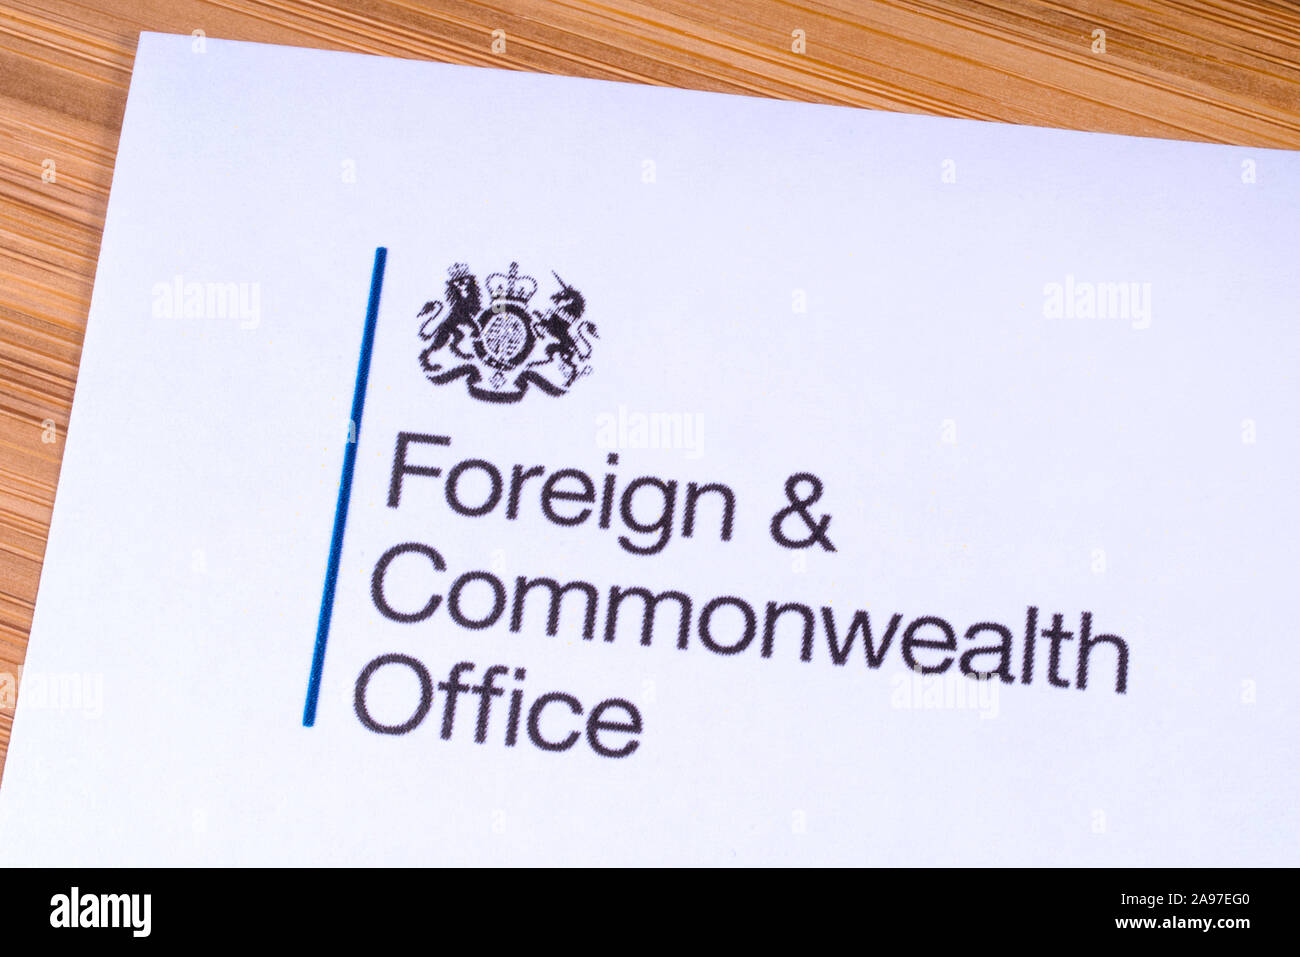 London, UK - March 12th 2019: Close-up of the logo for the Foreign and Commonwealth Office, pictured on a piece of paper or leaflet. The FCO is a depa Stock Photo